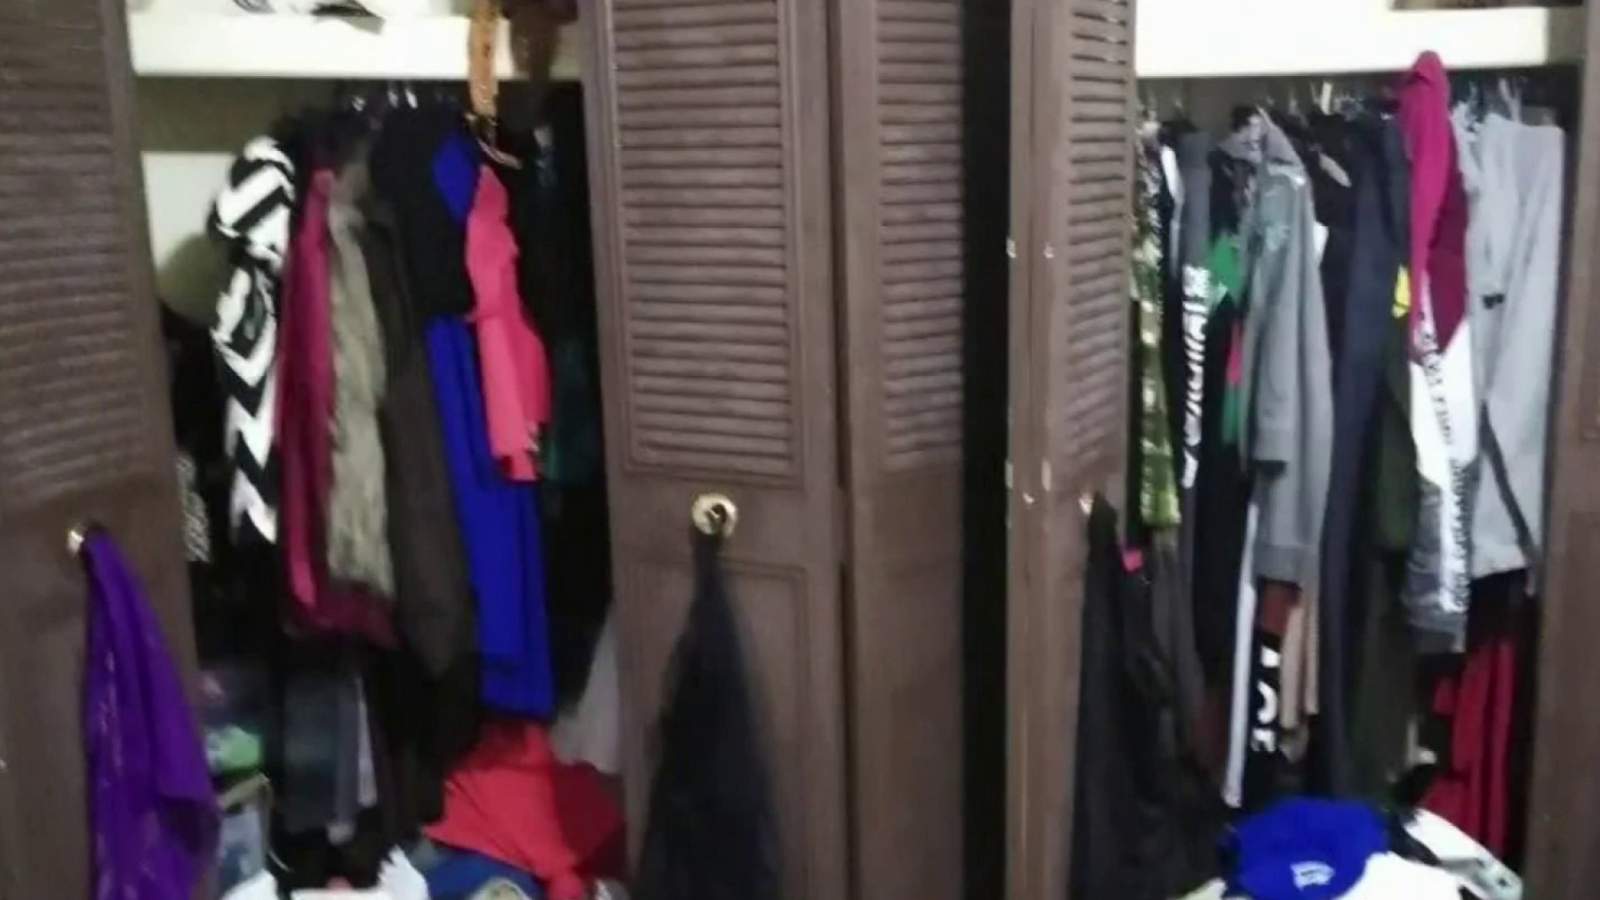 Detroit woman returns home from trip to find apartment ransacked, small business equipment stolen